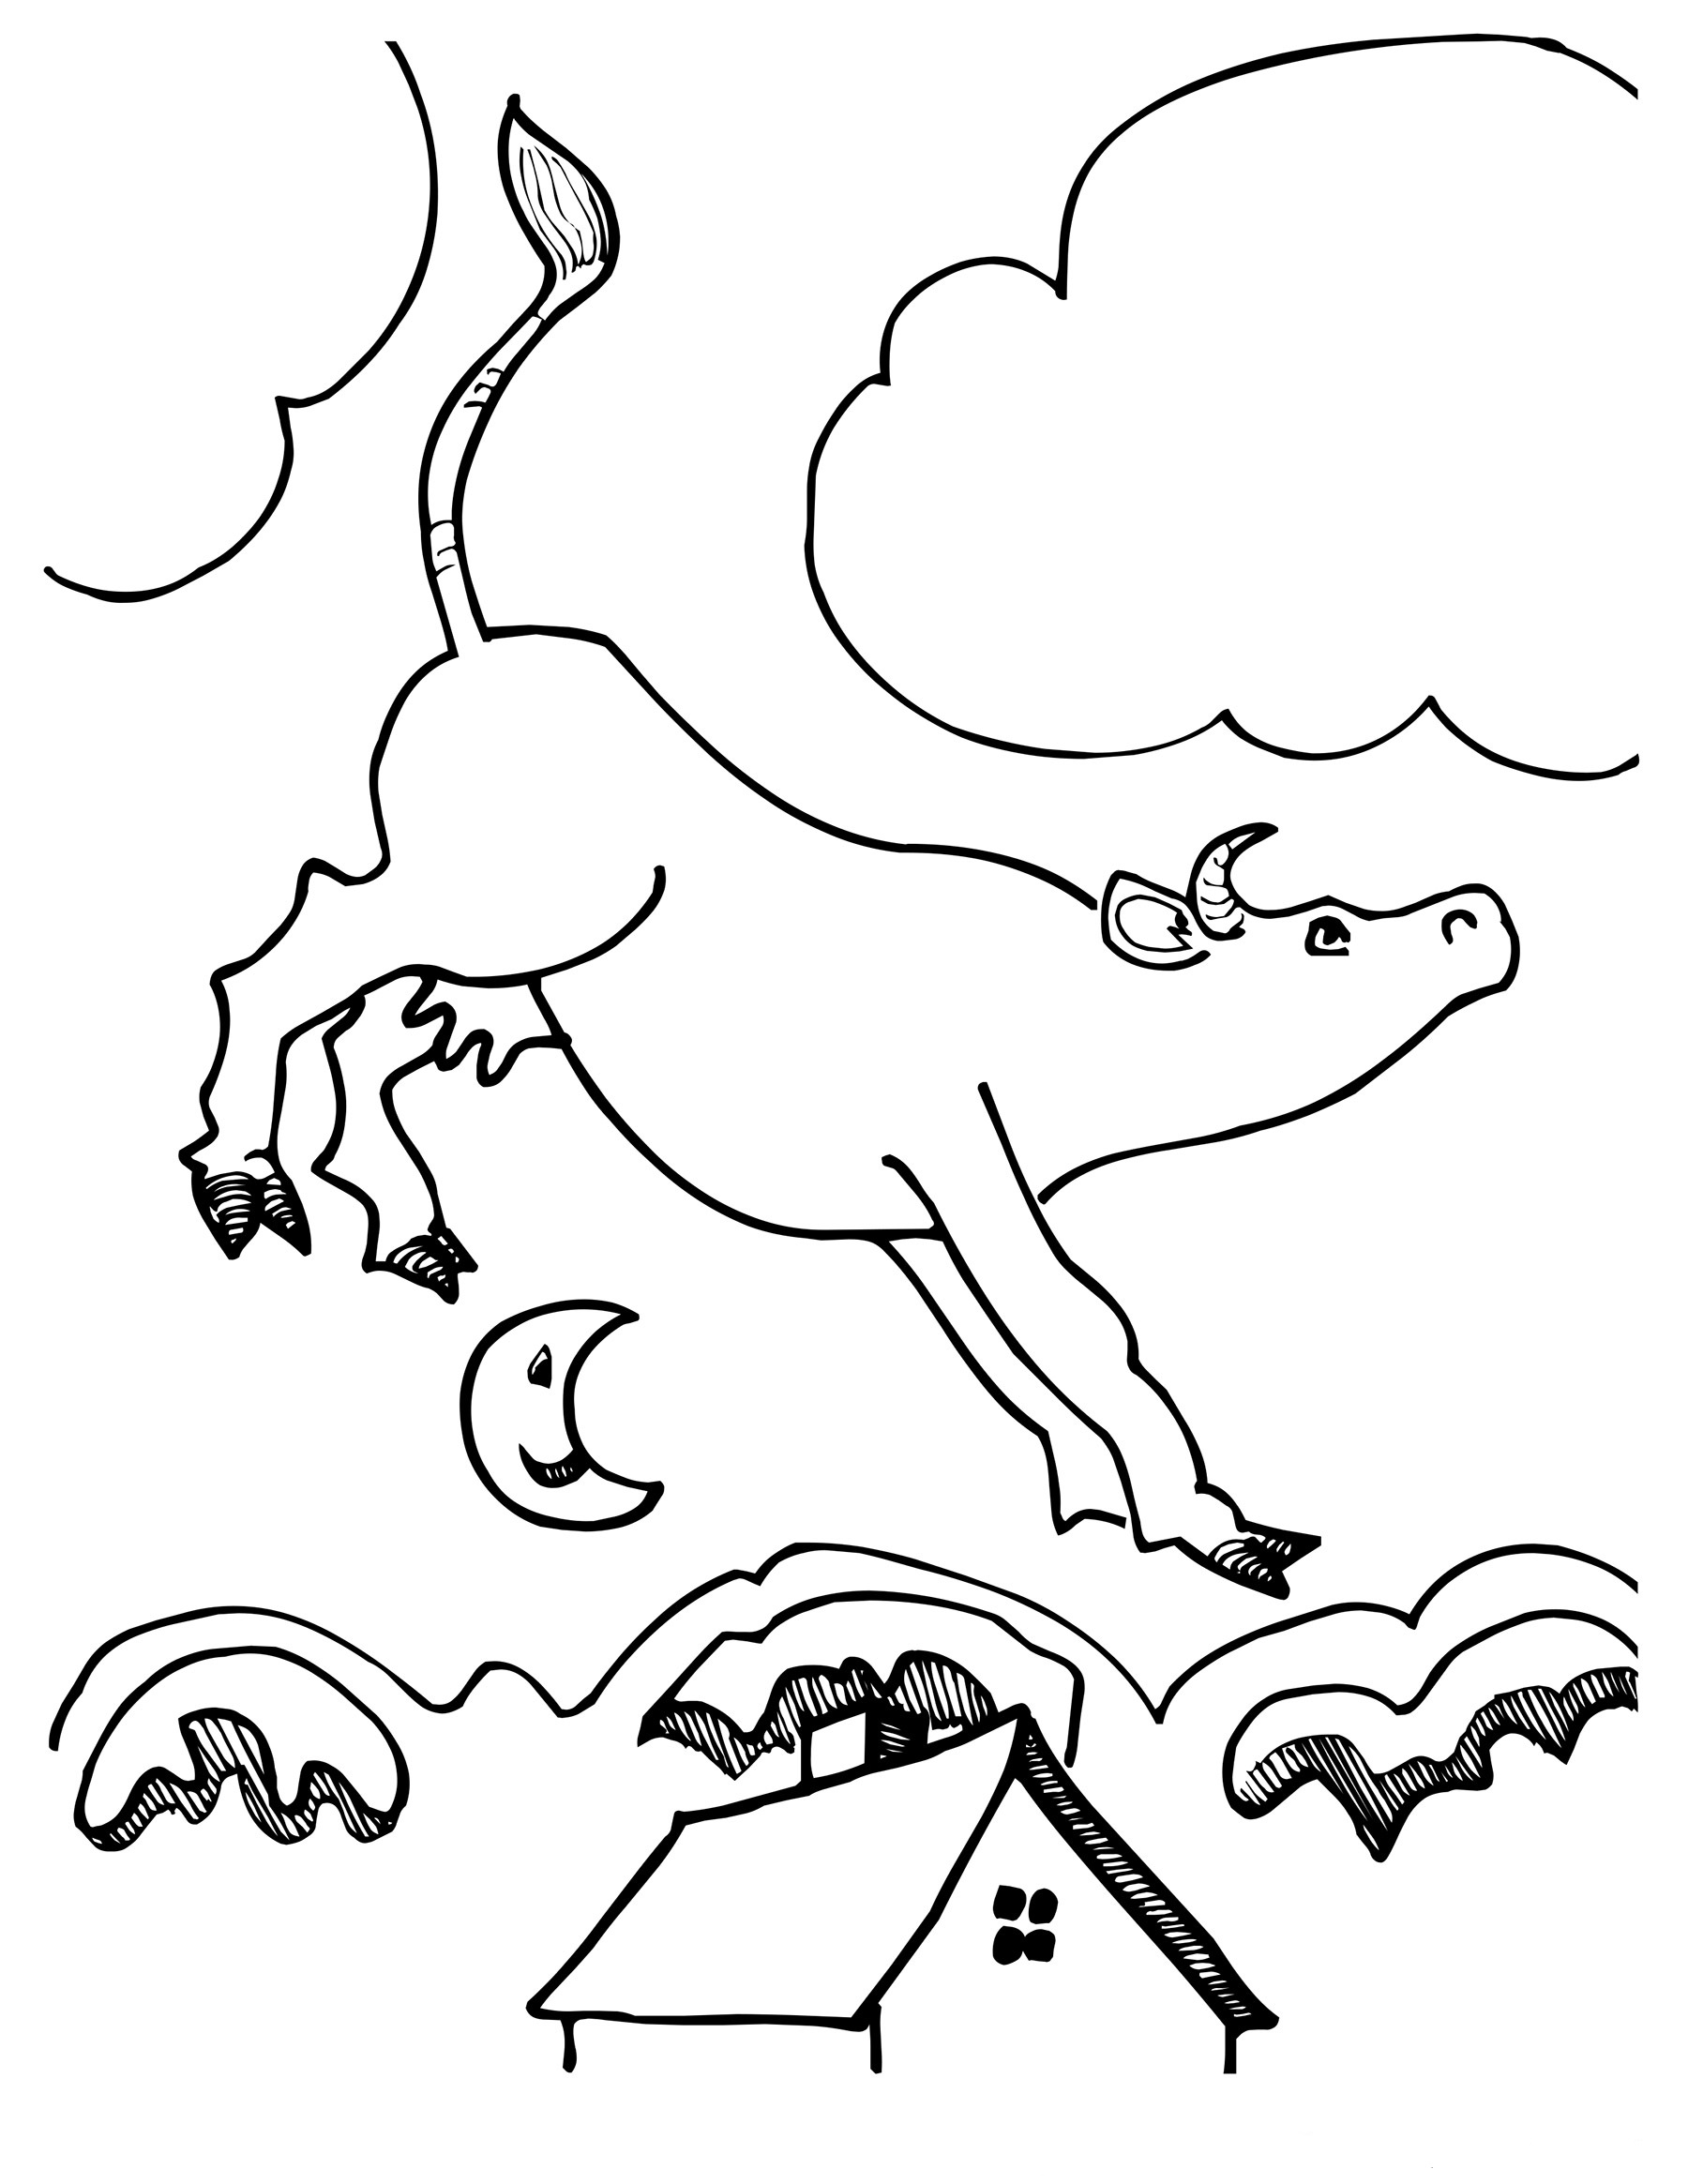 Flying Cow Coloring Page